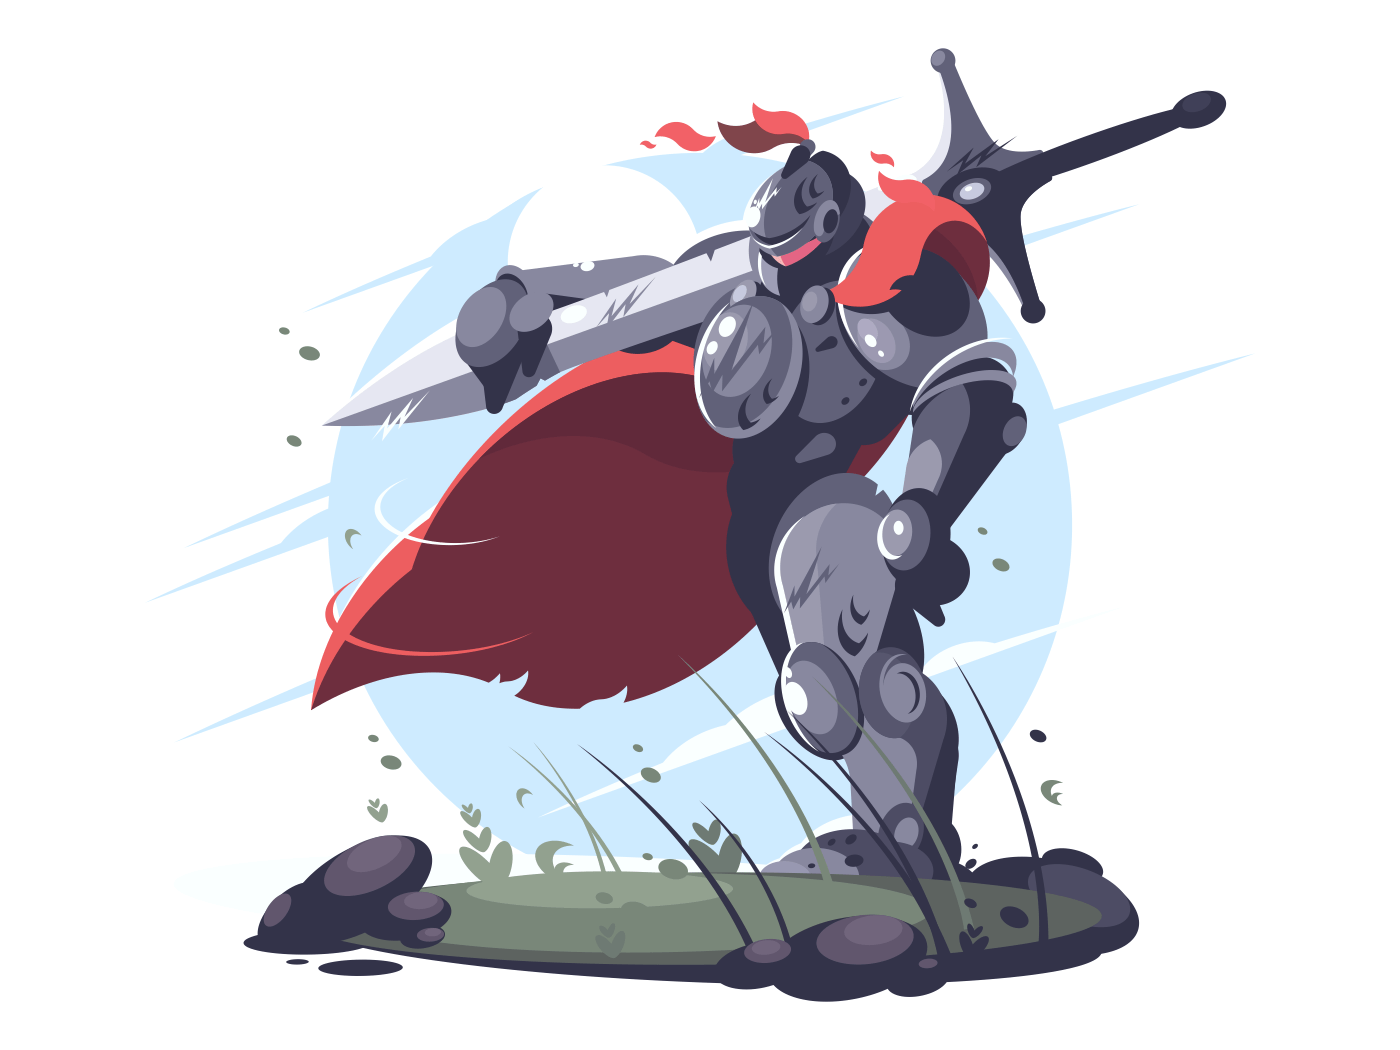 Medieval knight in metal armor and helmet with sword on battlefield. Vector illustration